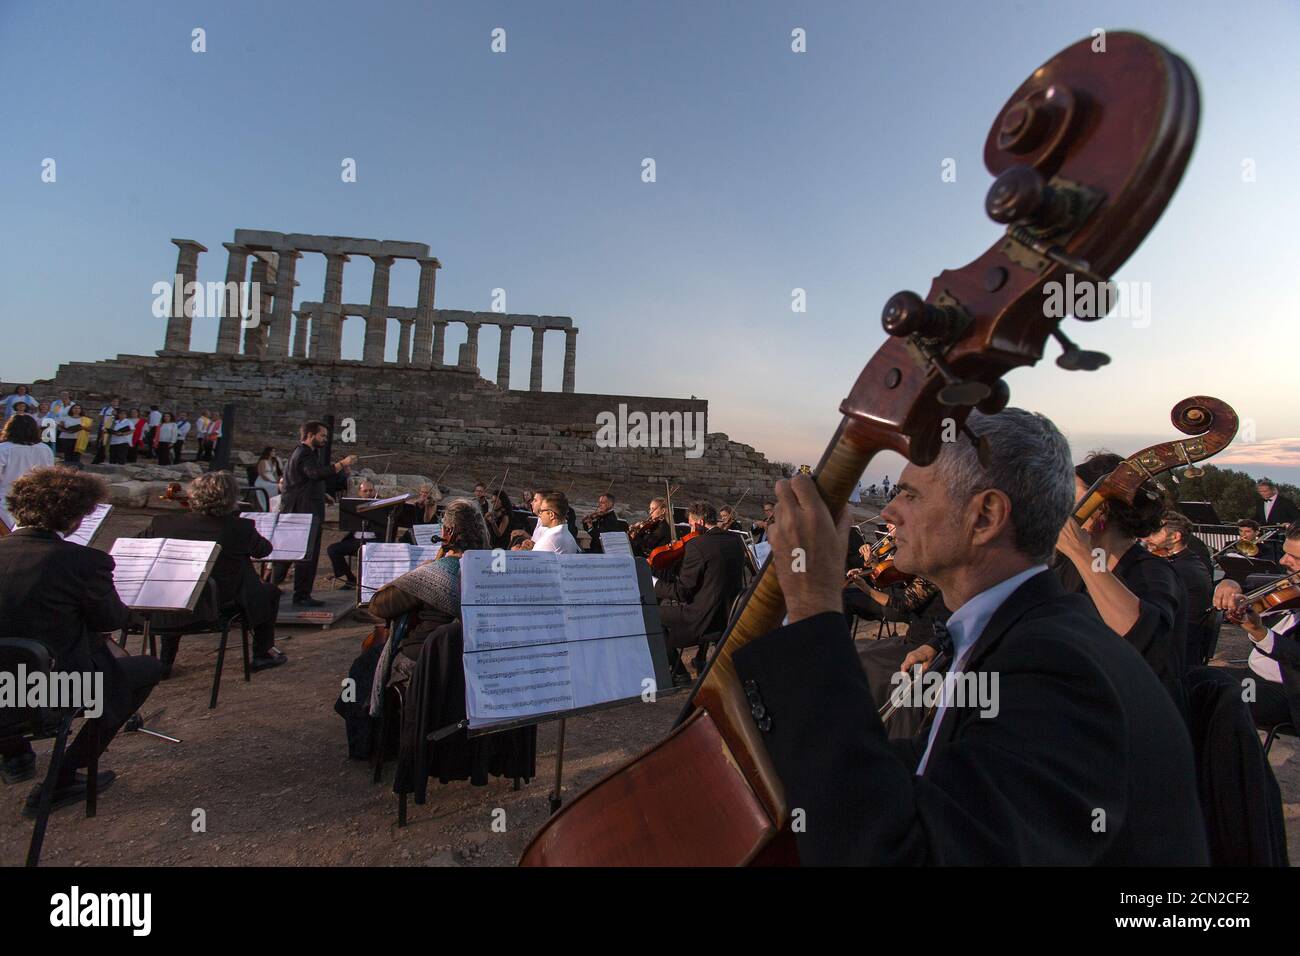 (200917) -- ATHENS, Sept. 17, 2020 (Xinhua) -- Musicians perform a musical in front of the ruins of the Temple of Poseidon at cape Sounion, some 70 km southeast of Athens, Greece, on Sept. 17, 2020. On the occasion of the 70th anniversary of the establishment of the Greek National Tourism Organization (GNTO) and the 71st anniversary of the founding of the People's Republic of China and the Mid-Autumn festival, a musical entitled 'As long as there shall be Achaeans -- Variations on a Sunbeam' was staged on Thursday in front of the ruins of the emblematic 2,500-year-old Temple of Poseidon, the g Stock Photo